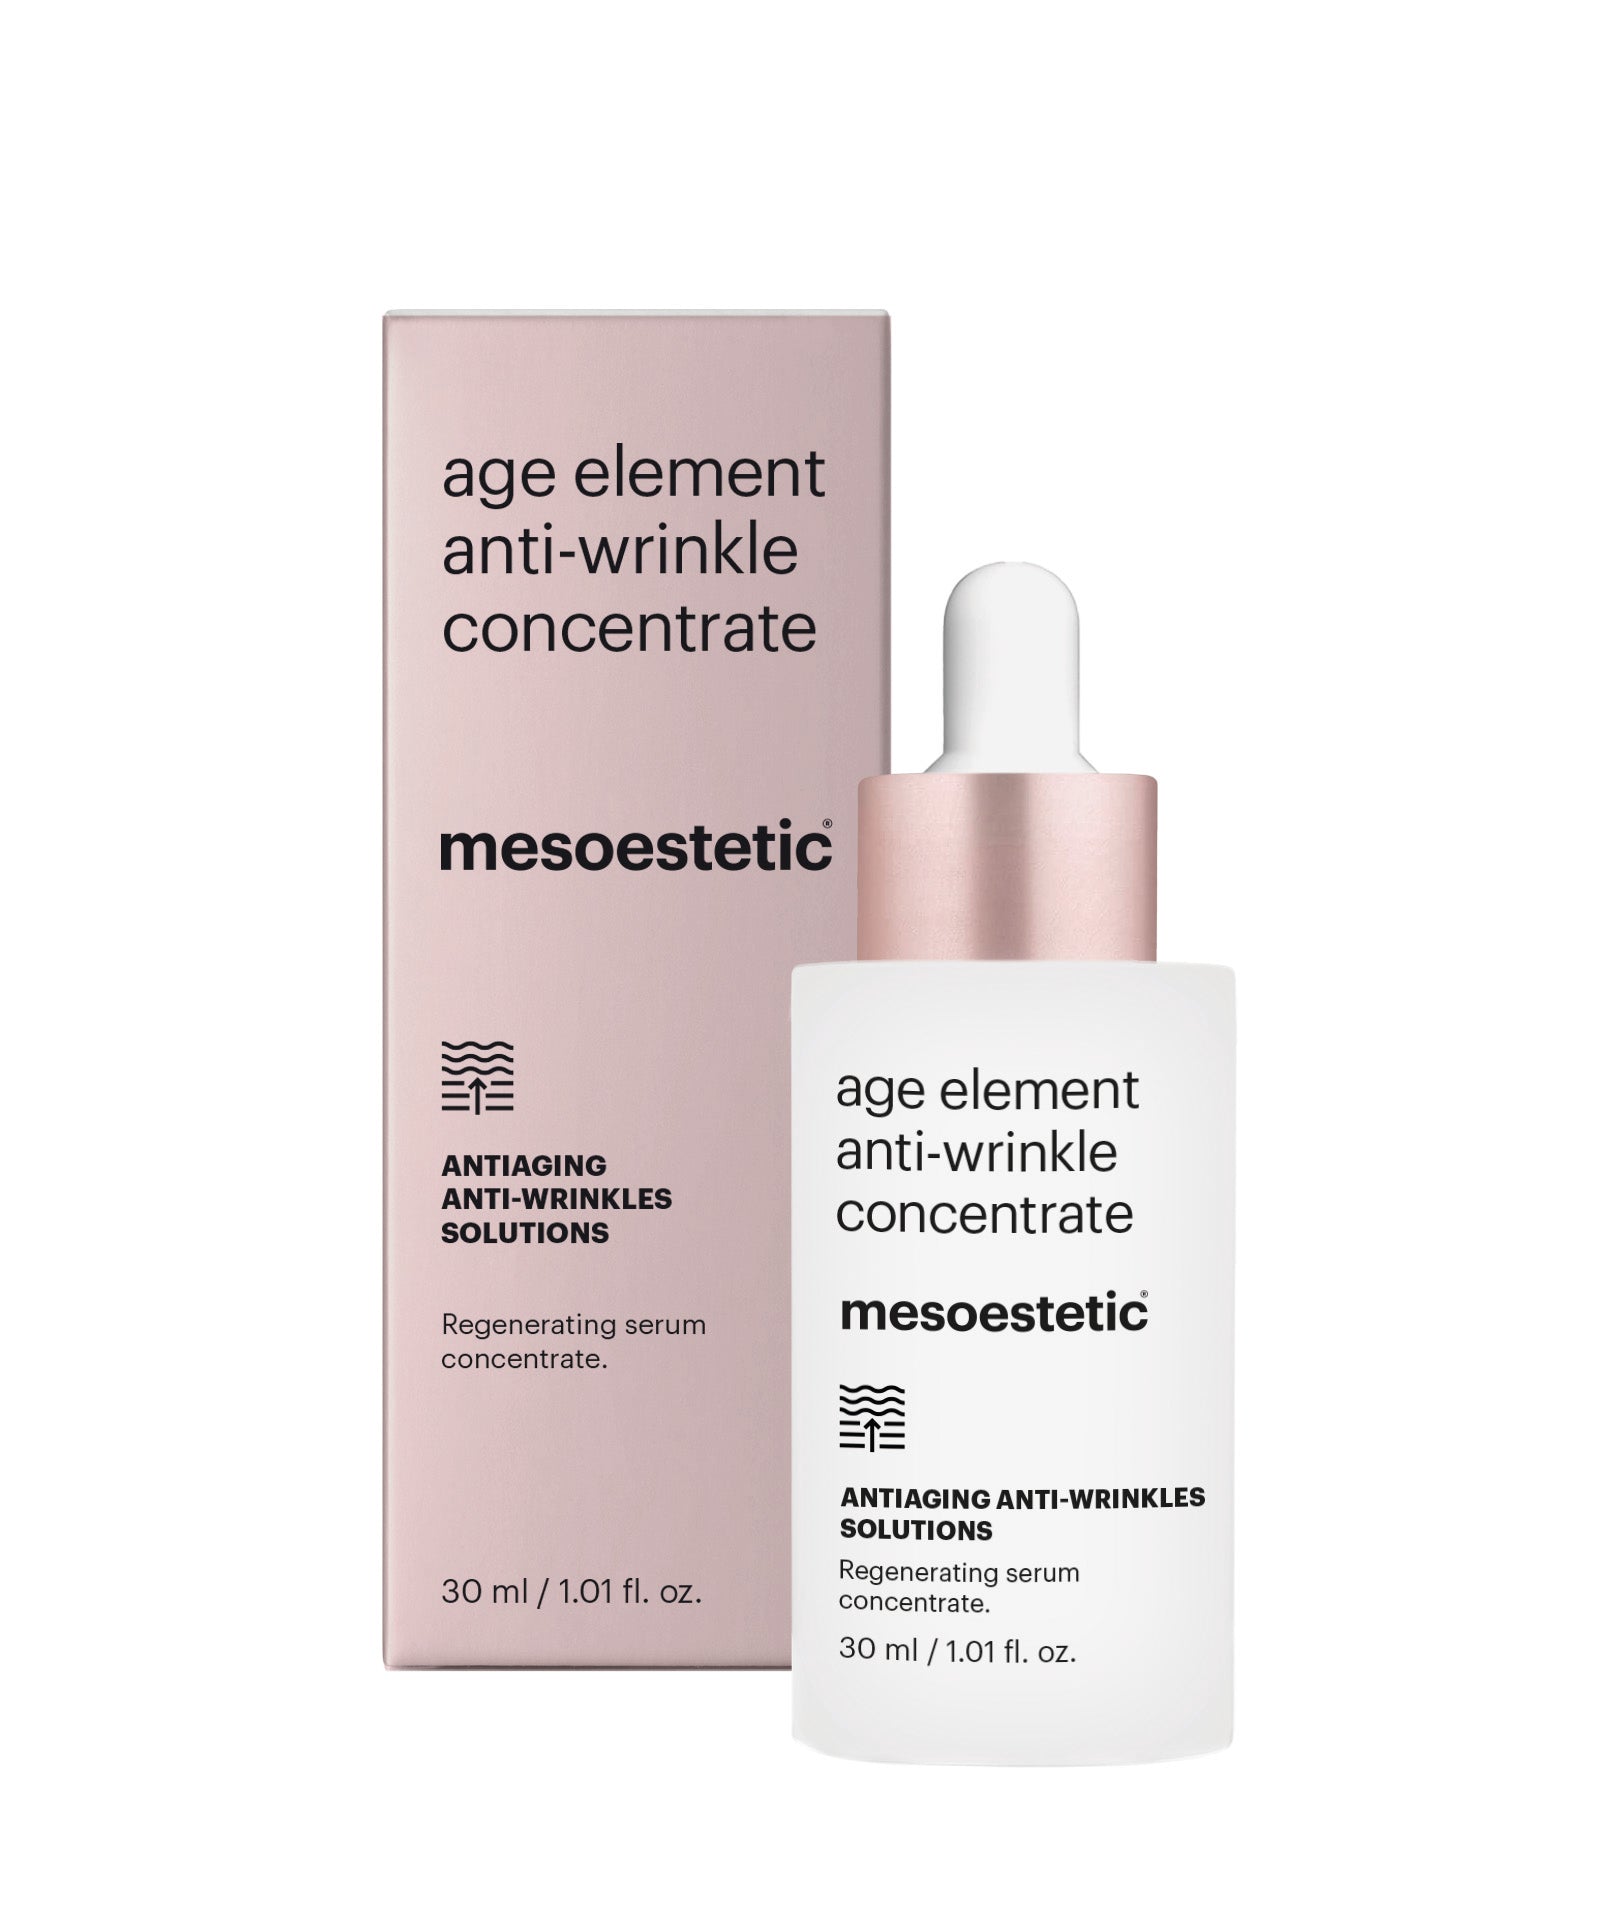 Mesoestetic age element anti-wrinkle concentrate